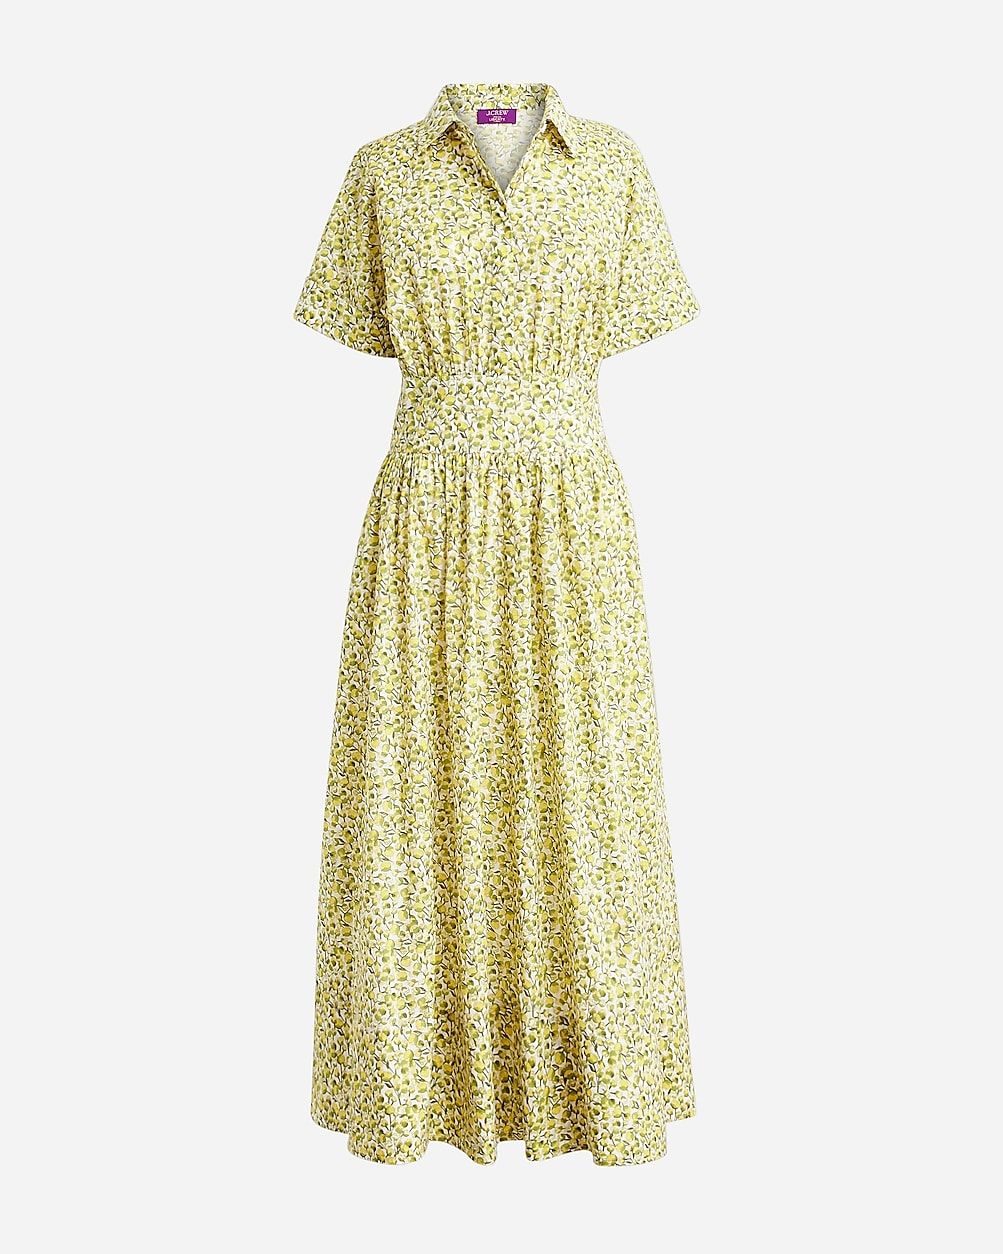 Fitted-waist shirtdress in Liberty® Eliza's Yellow fabric | J.Crew US